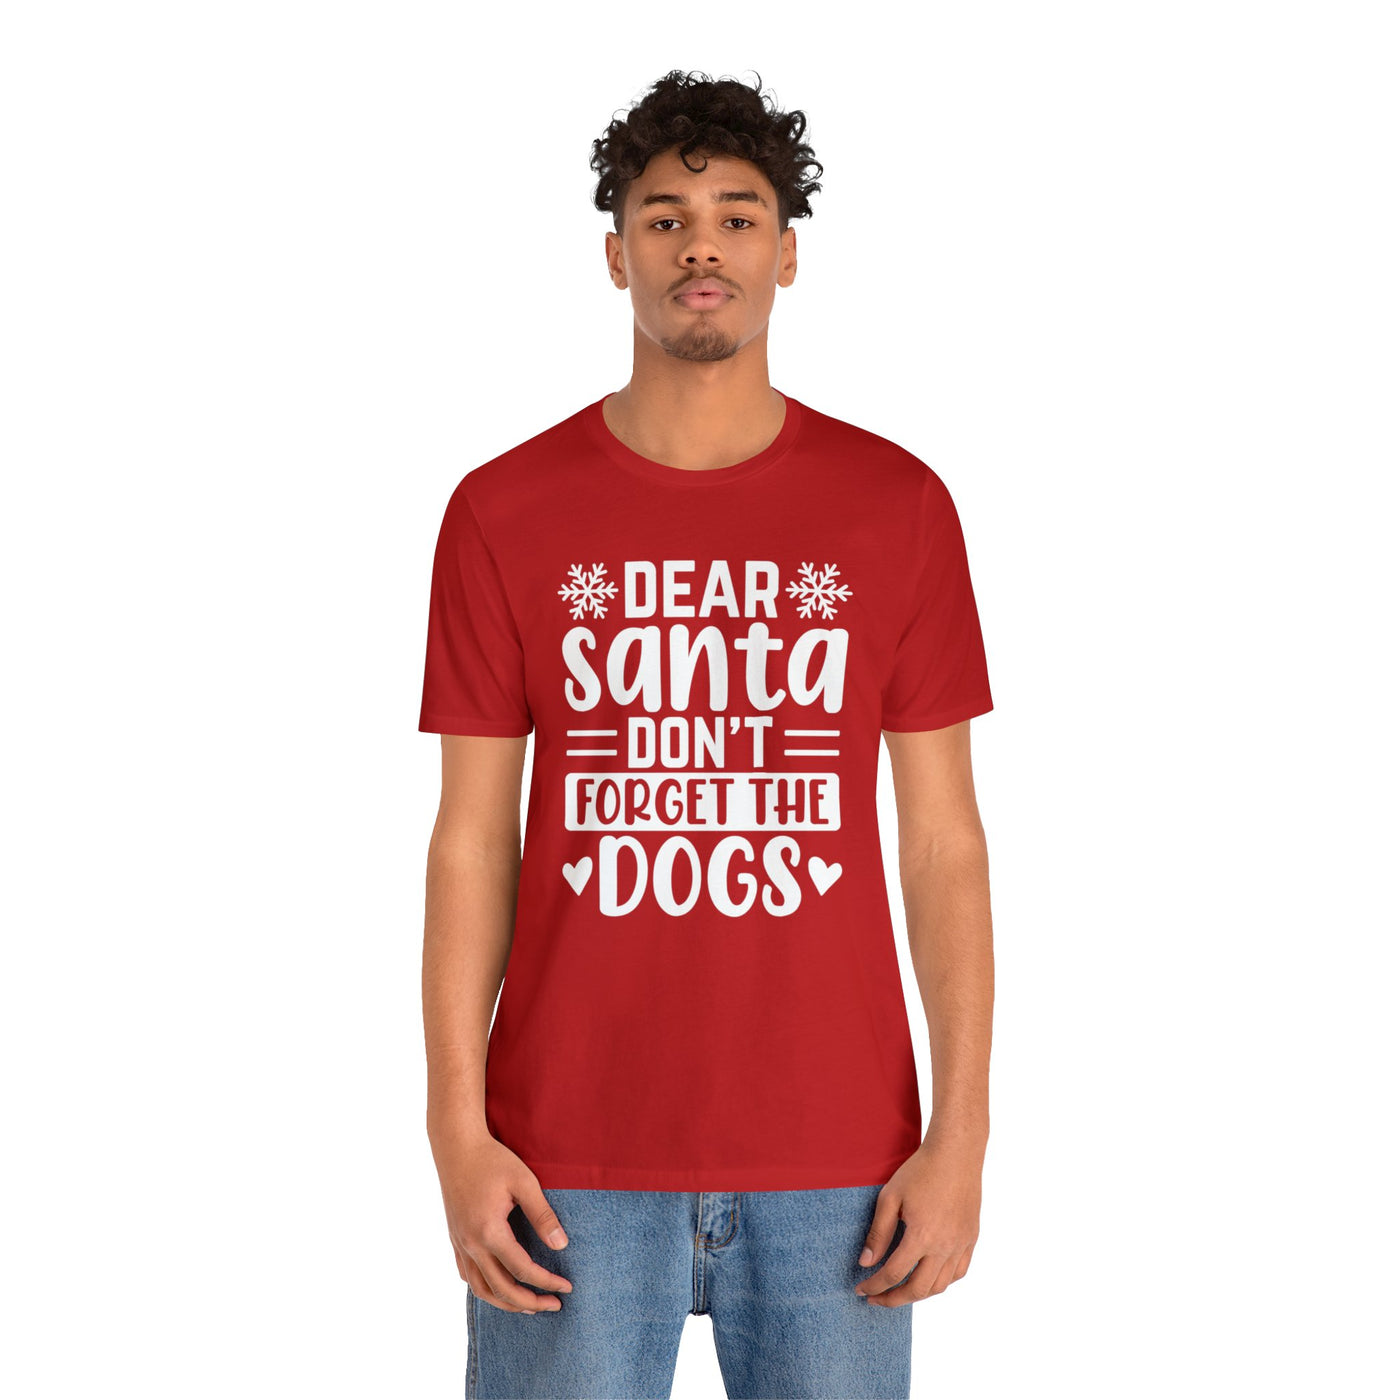 Dear Santa Don't Forget the Dogs T-Shirt